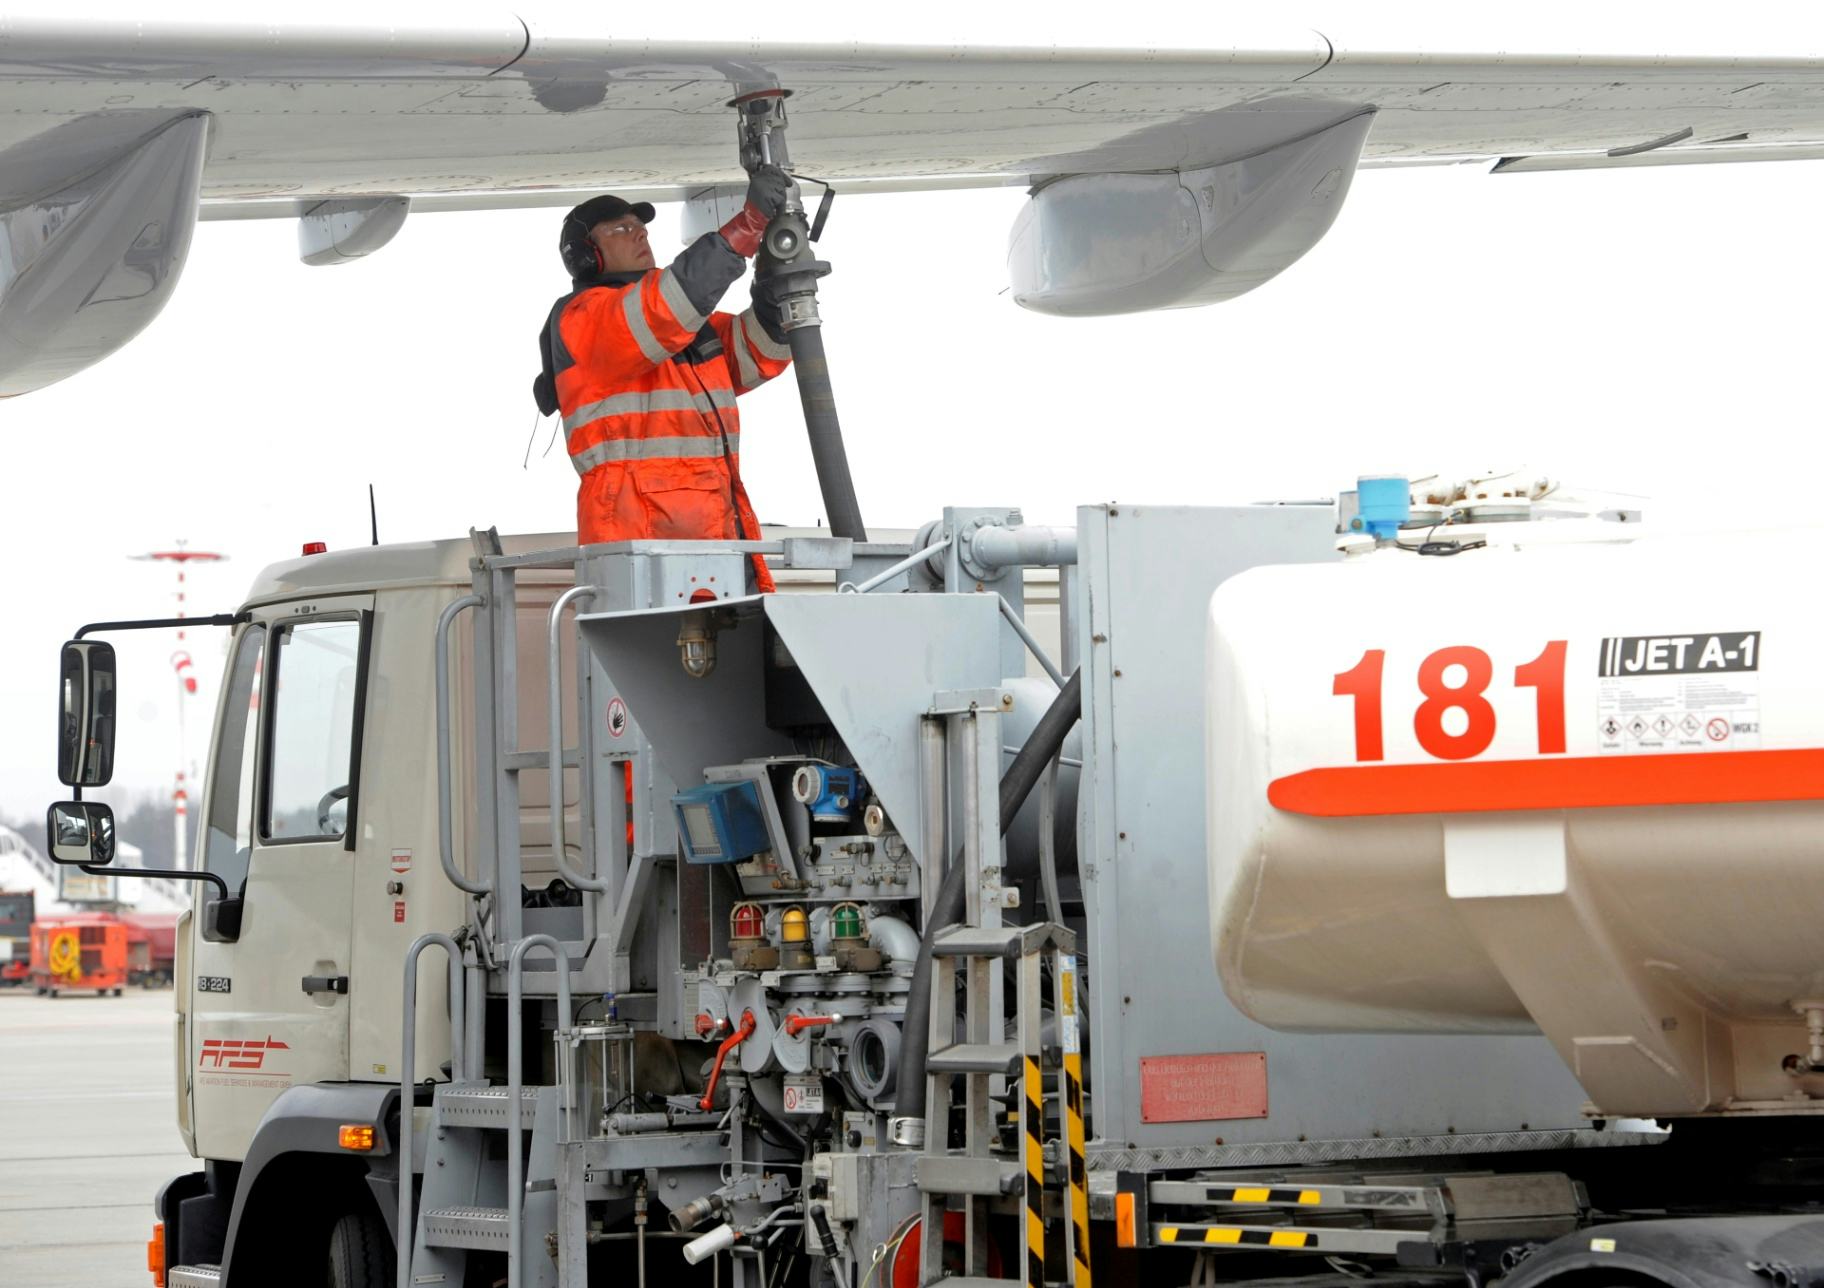 Foreign companies permitted to supply jet fuel to airlines